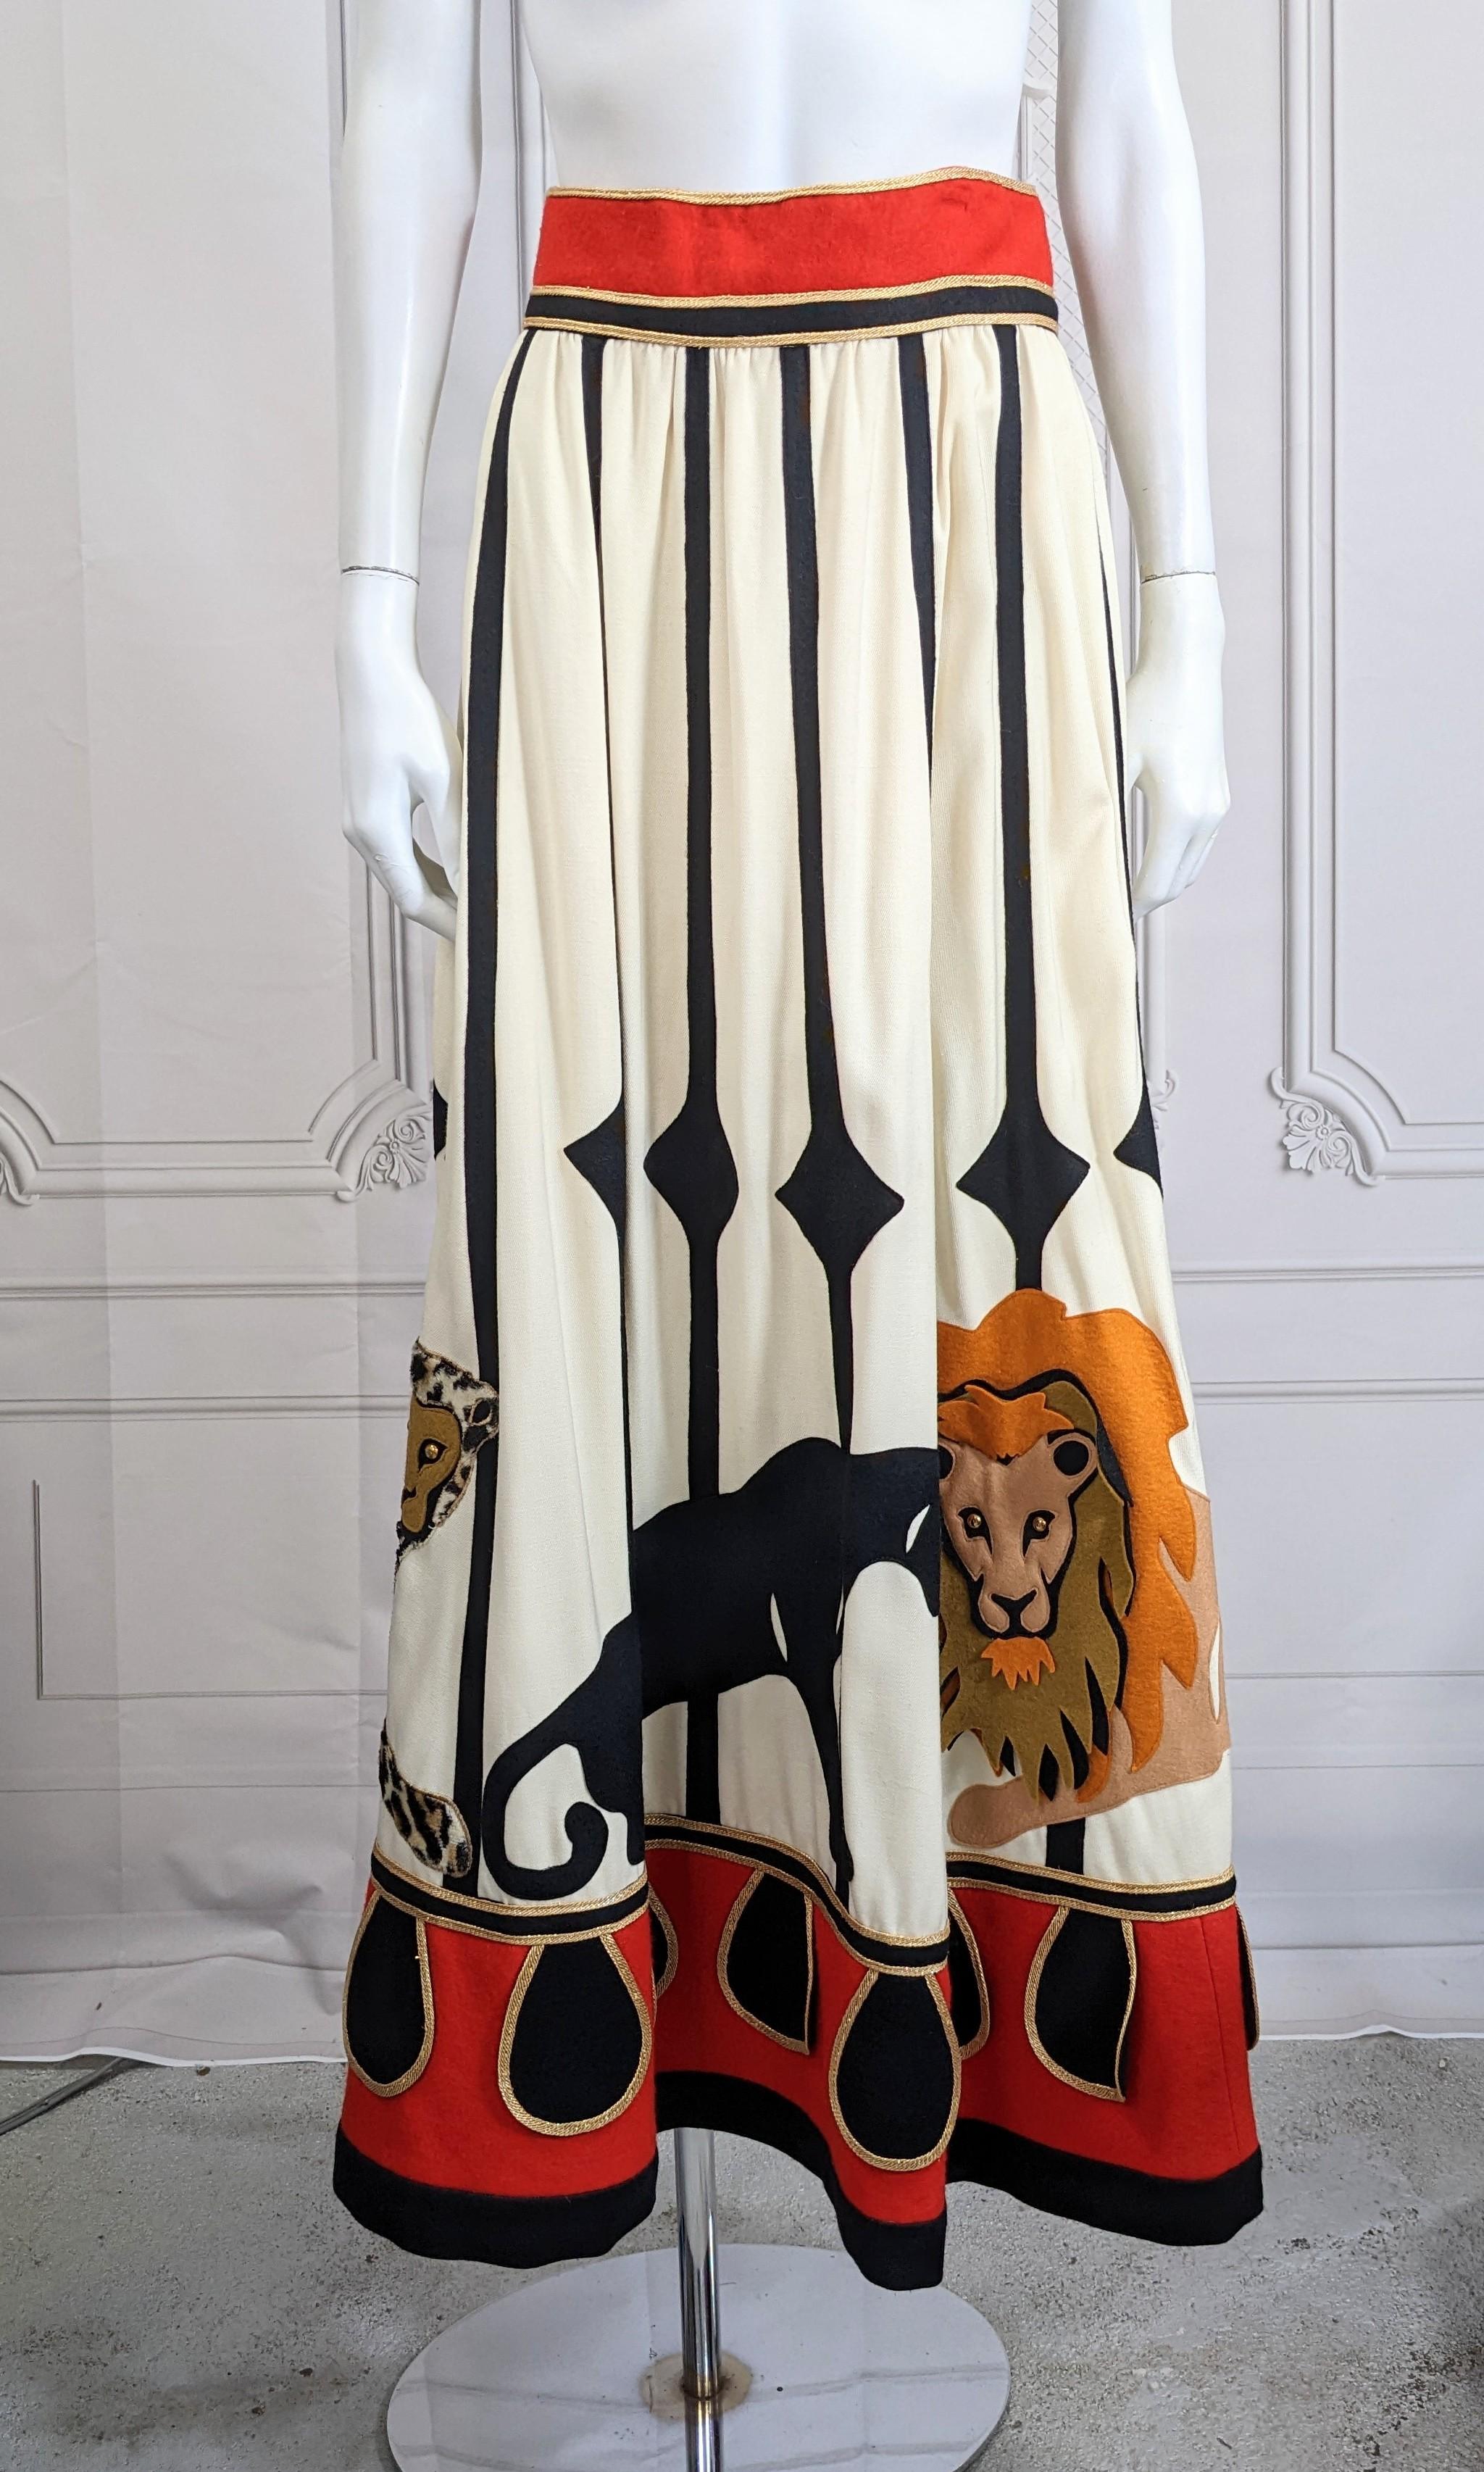 Malcom Starr Iconic, Collectible Circus Themed Hostess Skirt from the 1970's. Wonderful, quirky design with a simple full dirndl shape with applied cell bars with 3 large cats (lion, cougar, cheetah) applied along the hem. Wool twill is appliqued